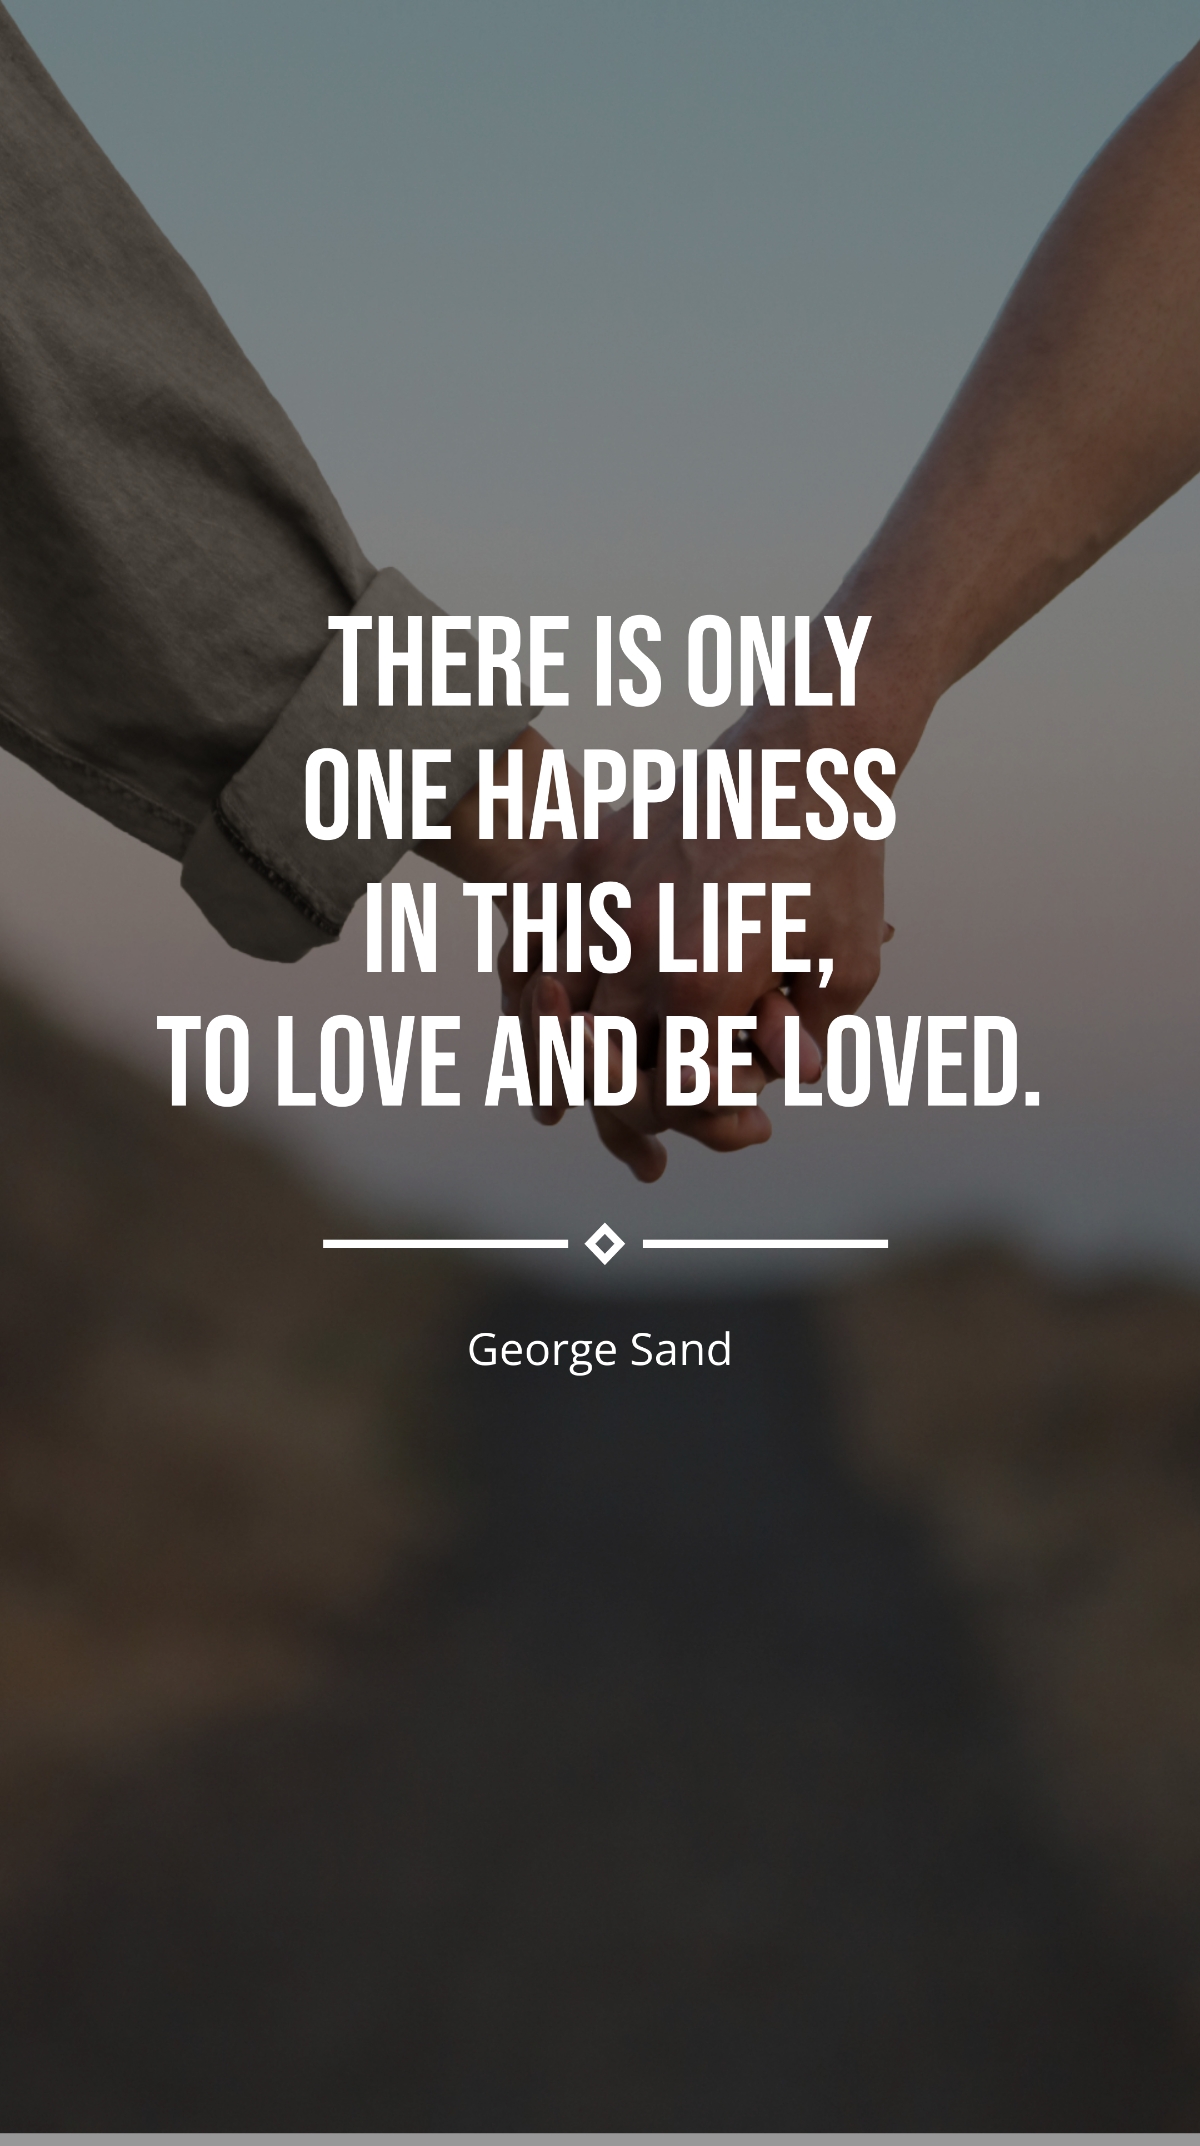 George Sand - There is only one happiness in this life, to love and be loved. Template